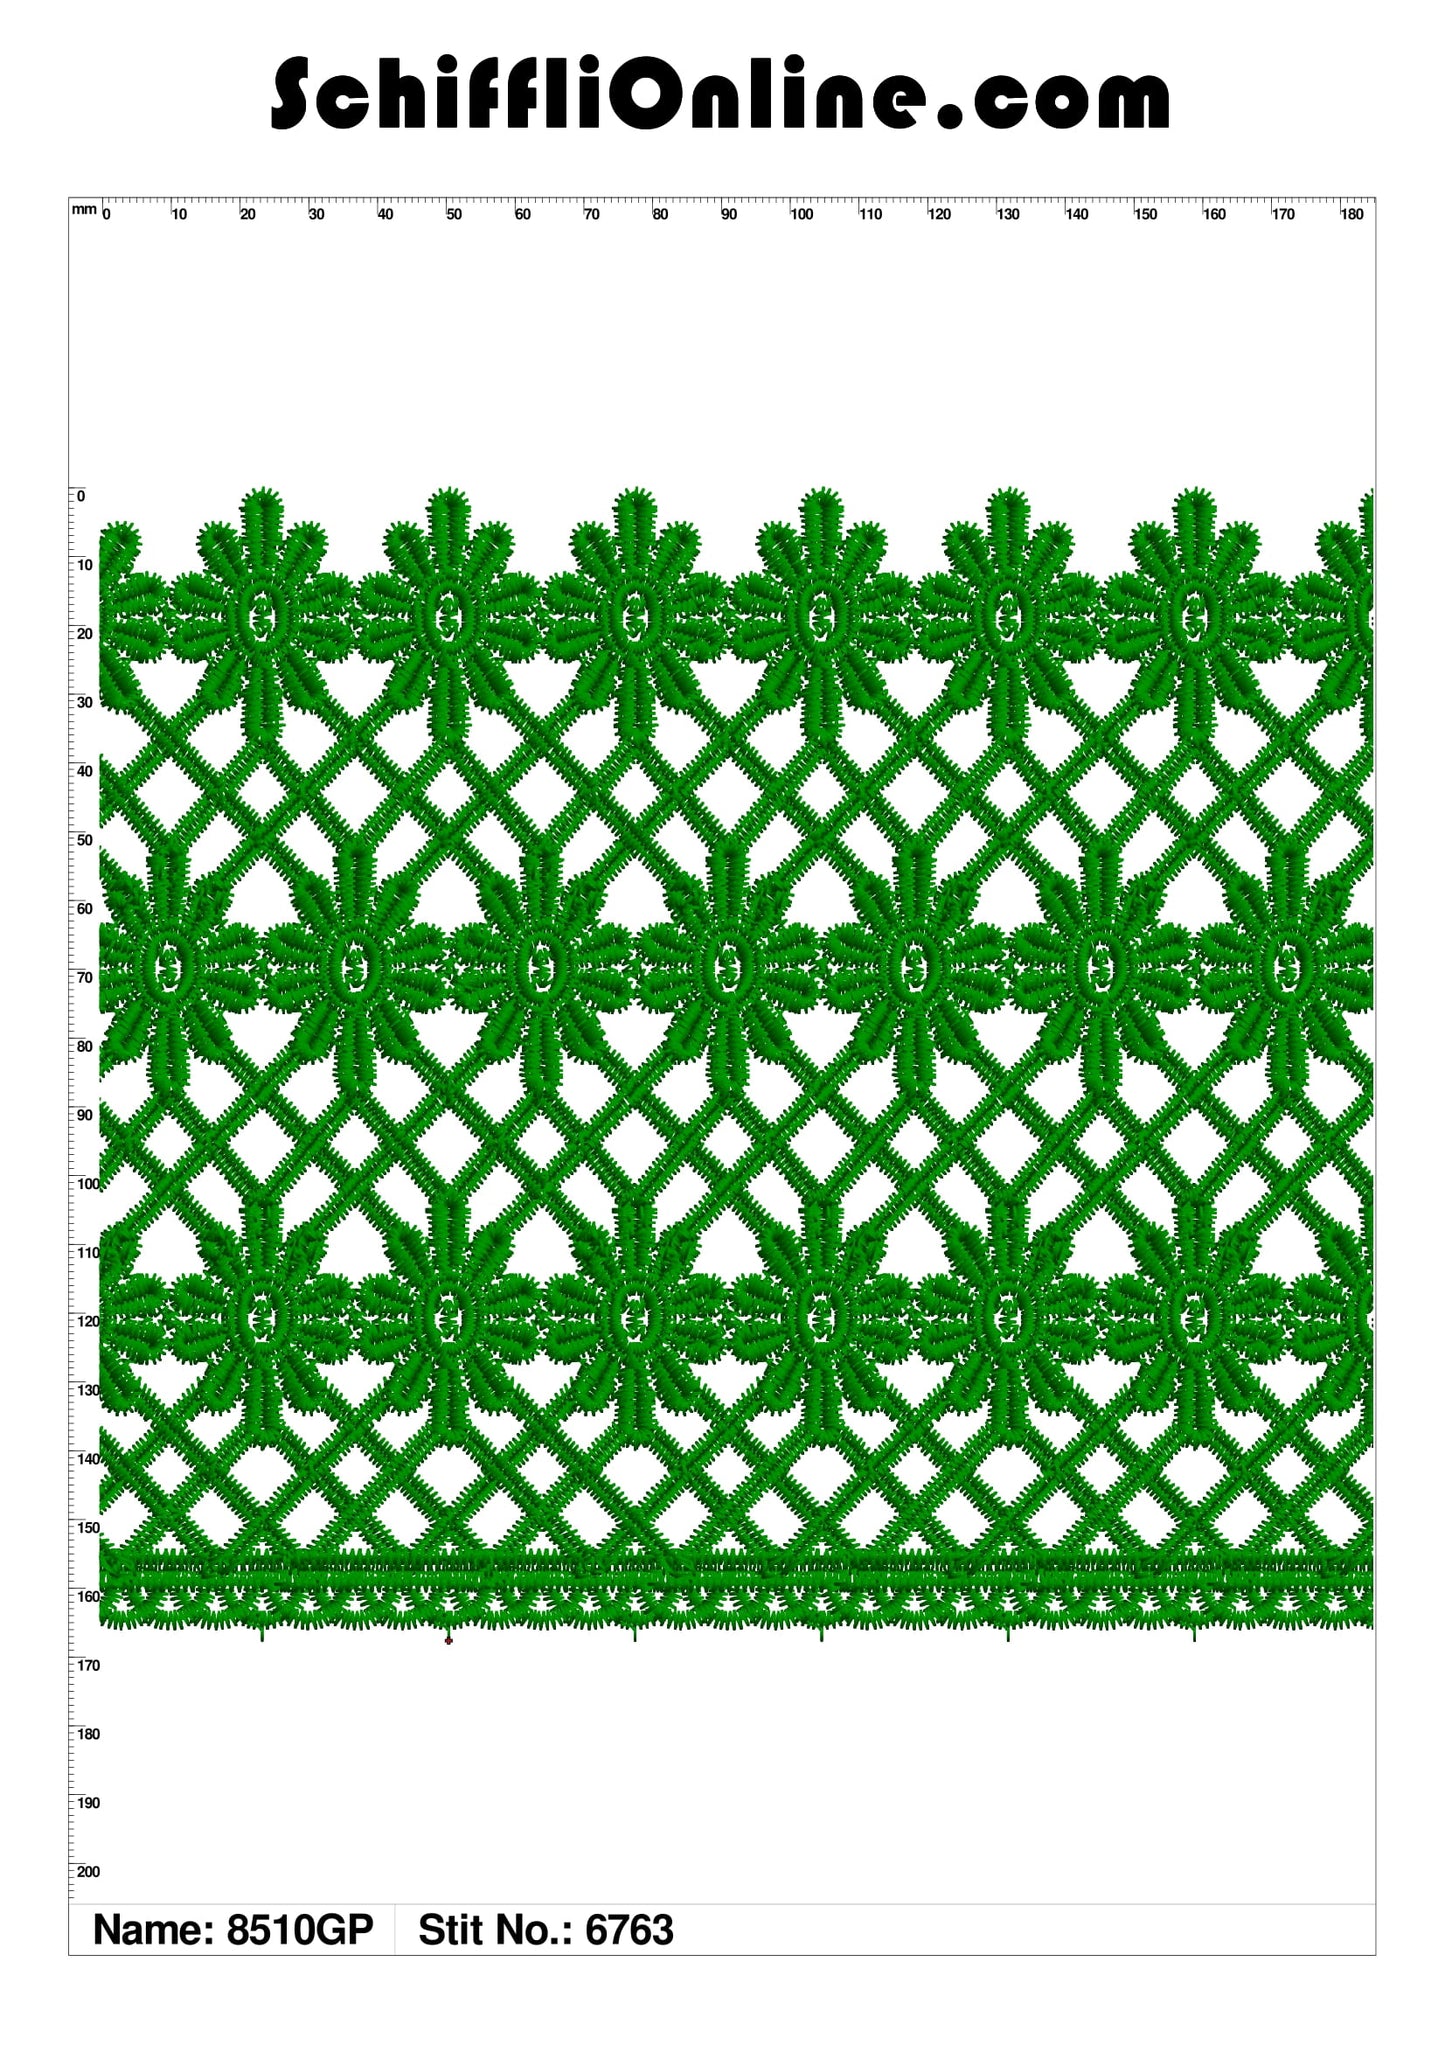 Book 176 CHEMICAL LACE 4X4 50 DESIGNS